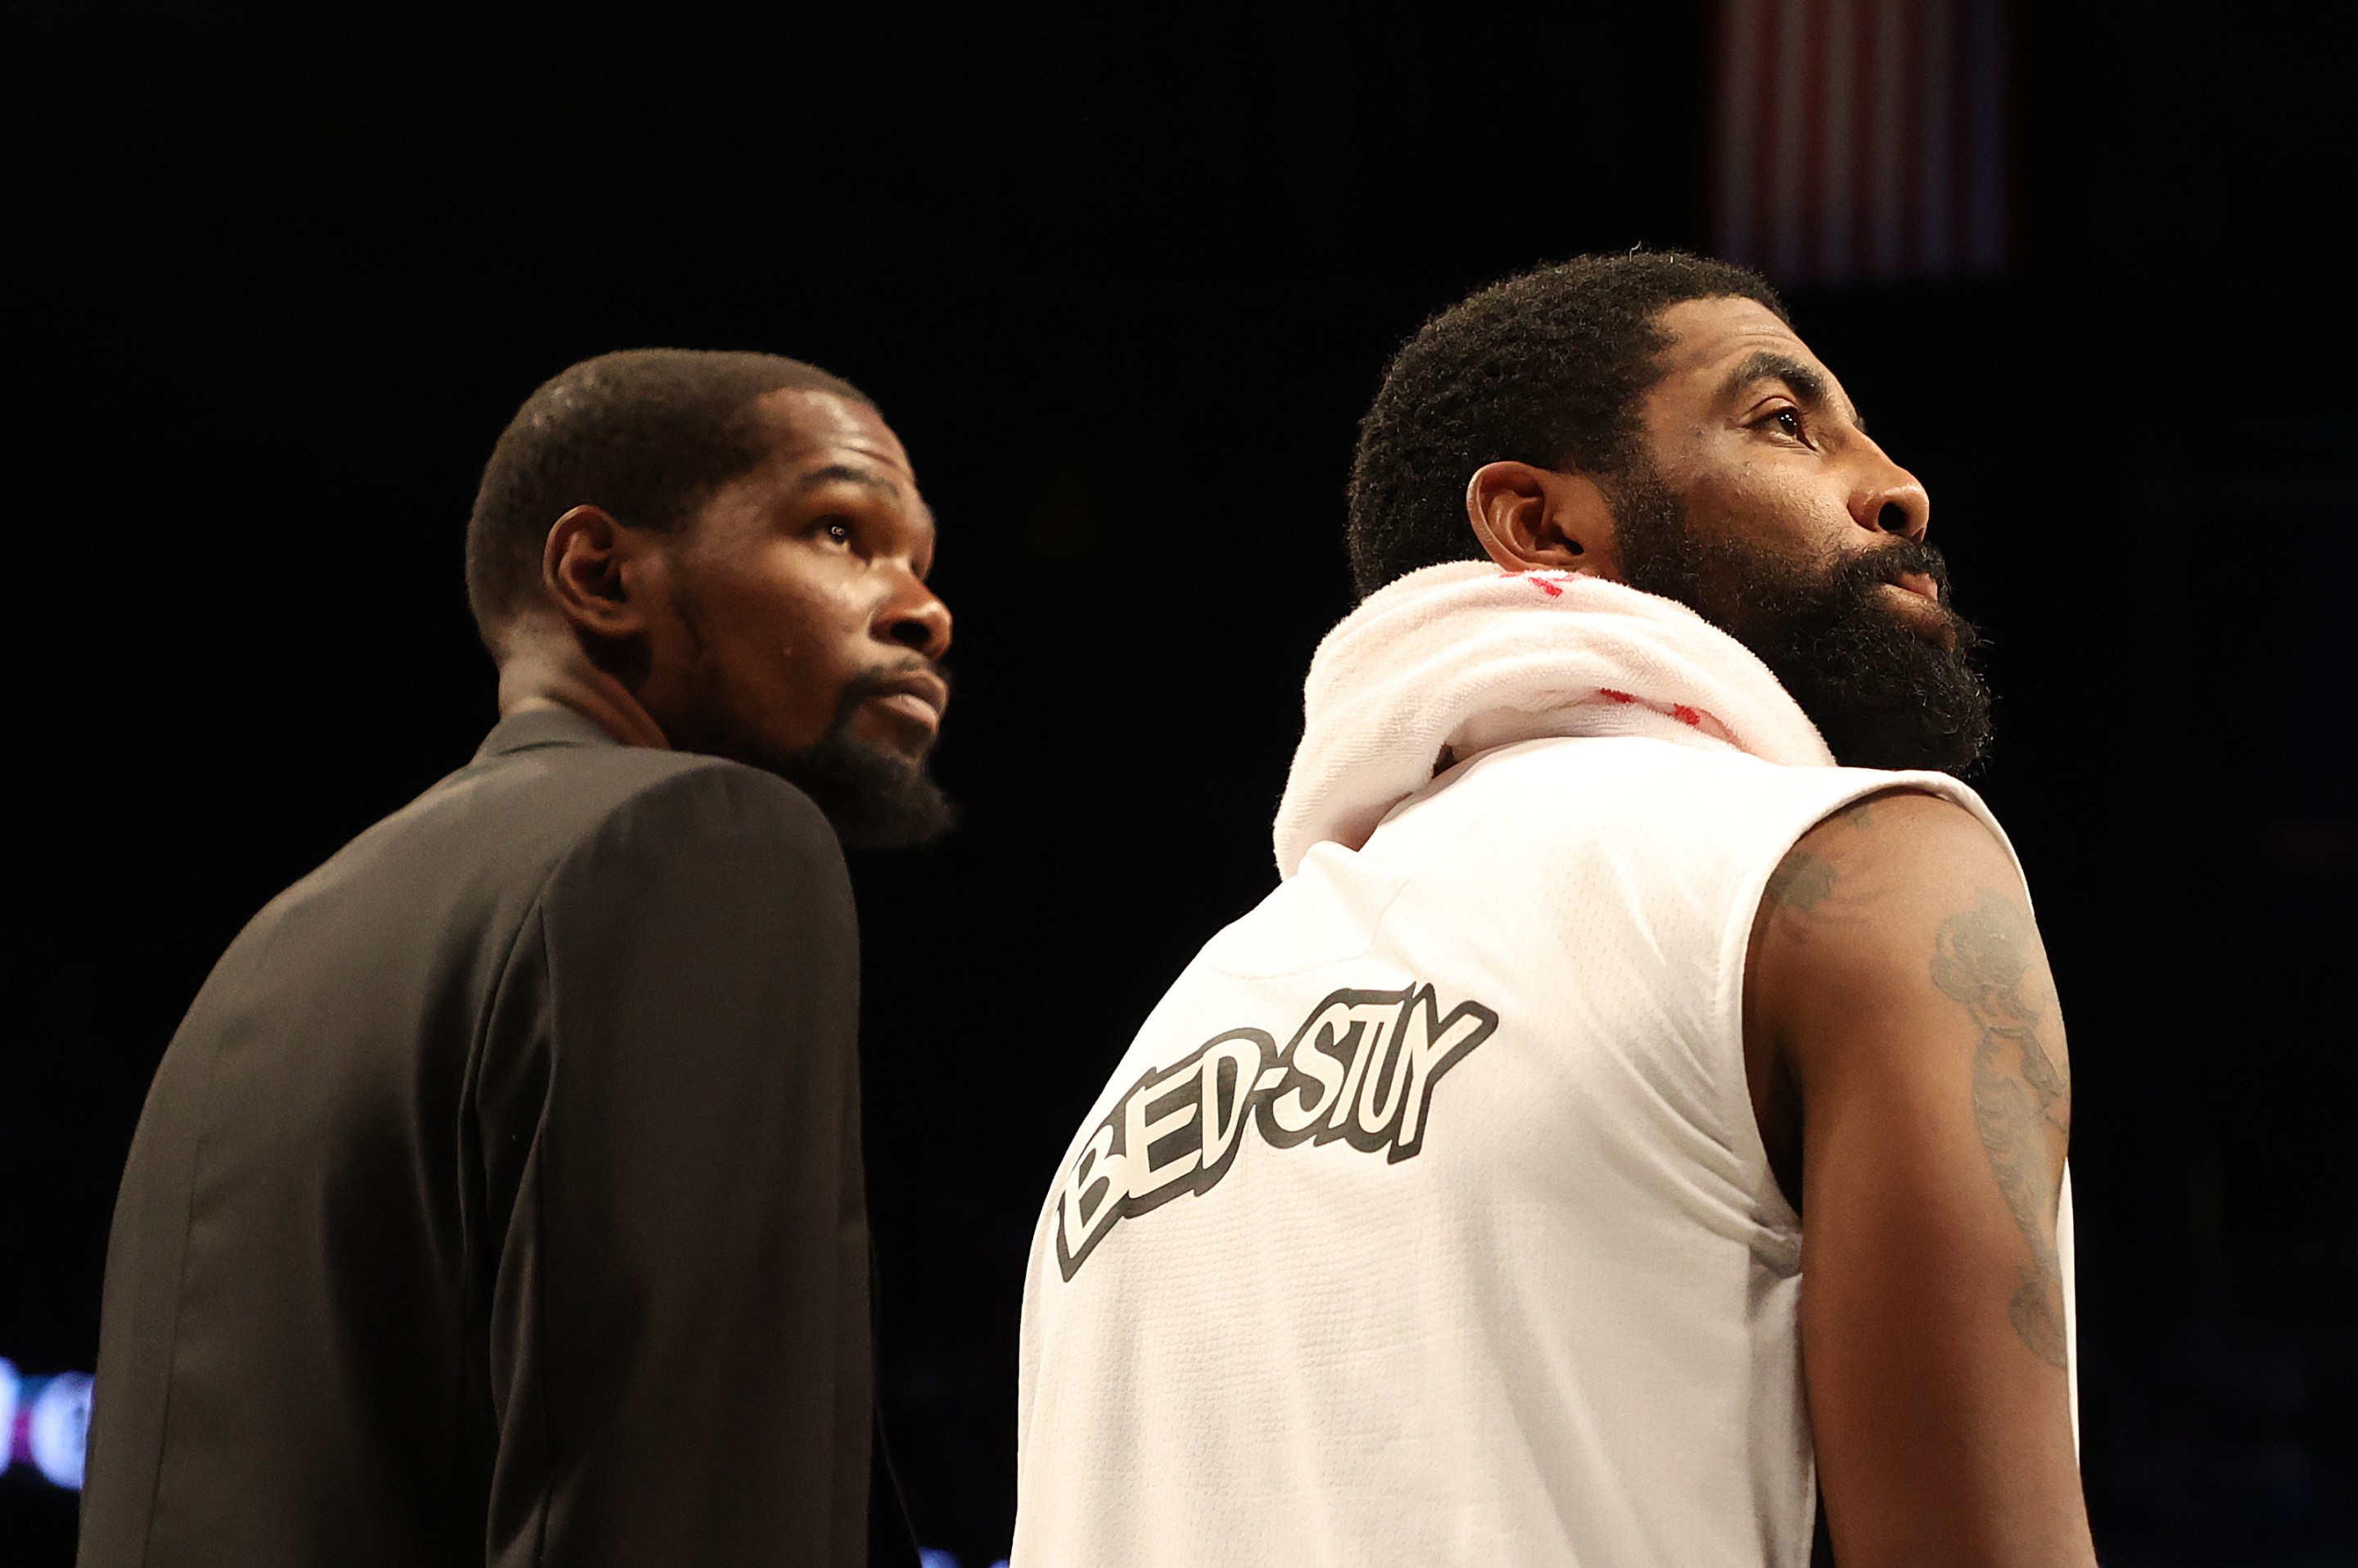 Kevin Durant and Kyrie Irving look in the same direction.